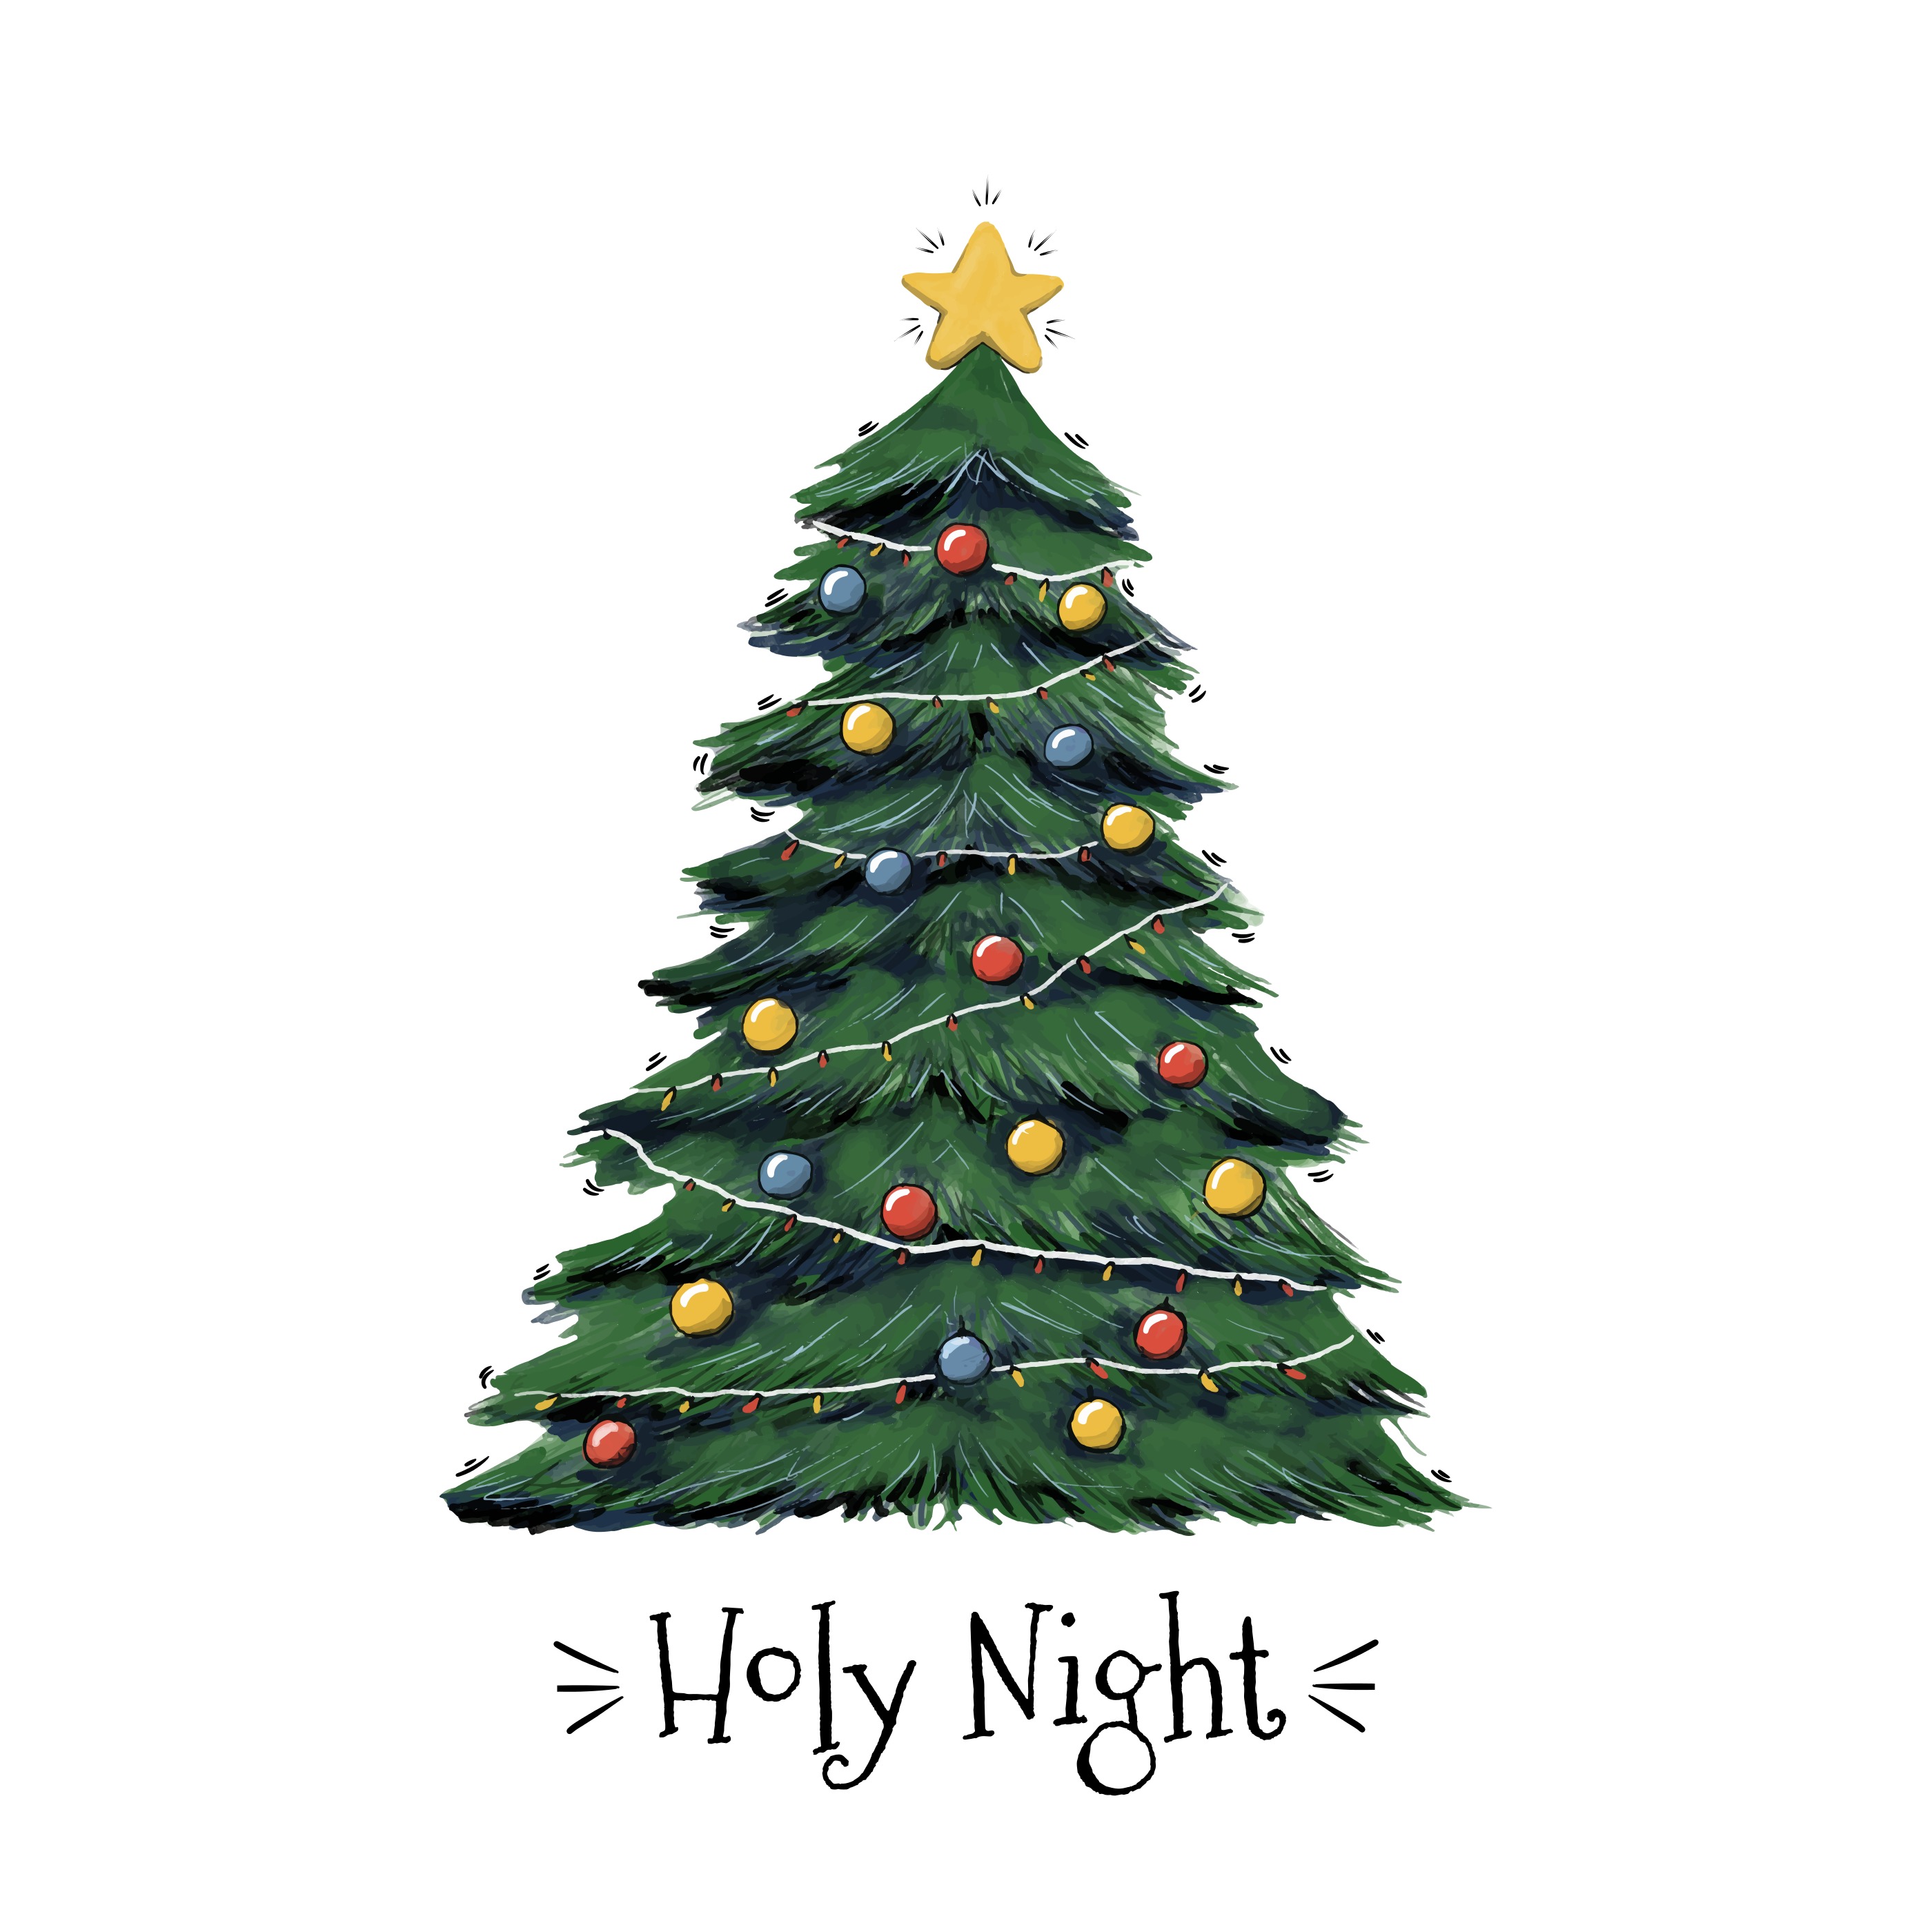 Download Holy Night Christmas Tree Vector - Download Free Vectors ...